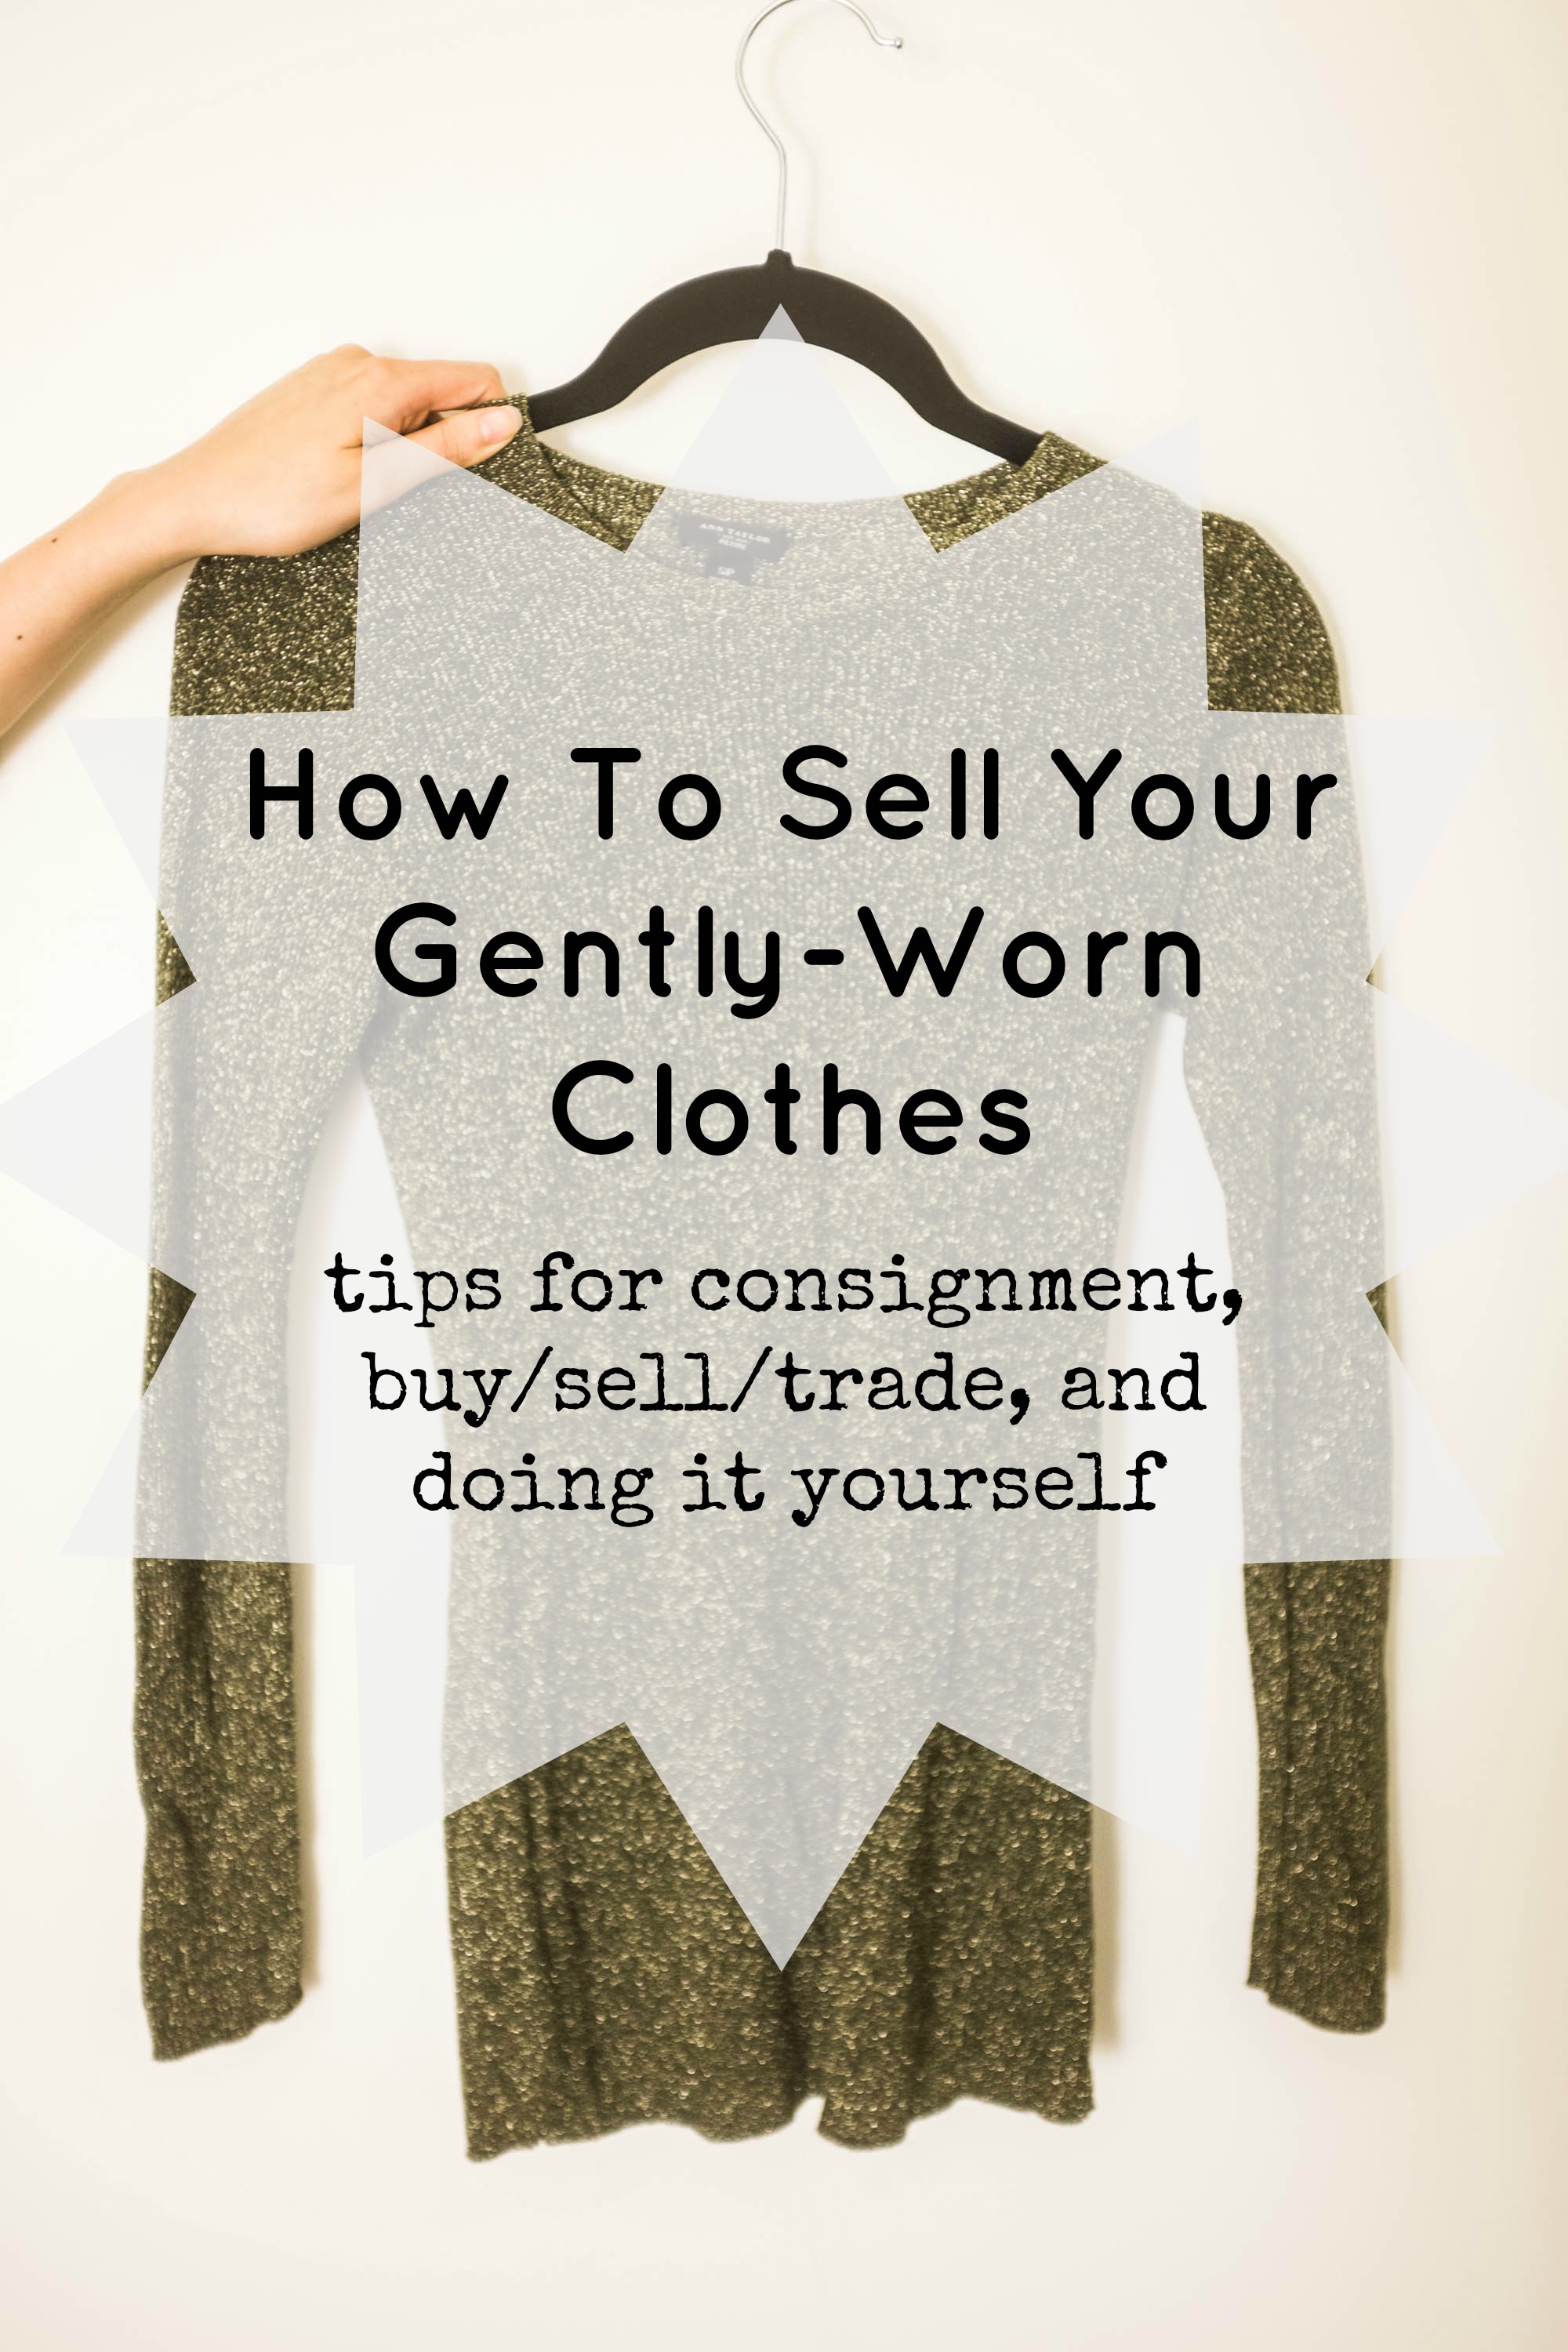 7 Best Places to Sell Clothes Online (for Fast Cash!)